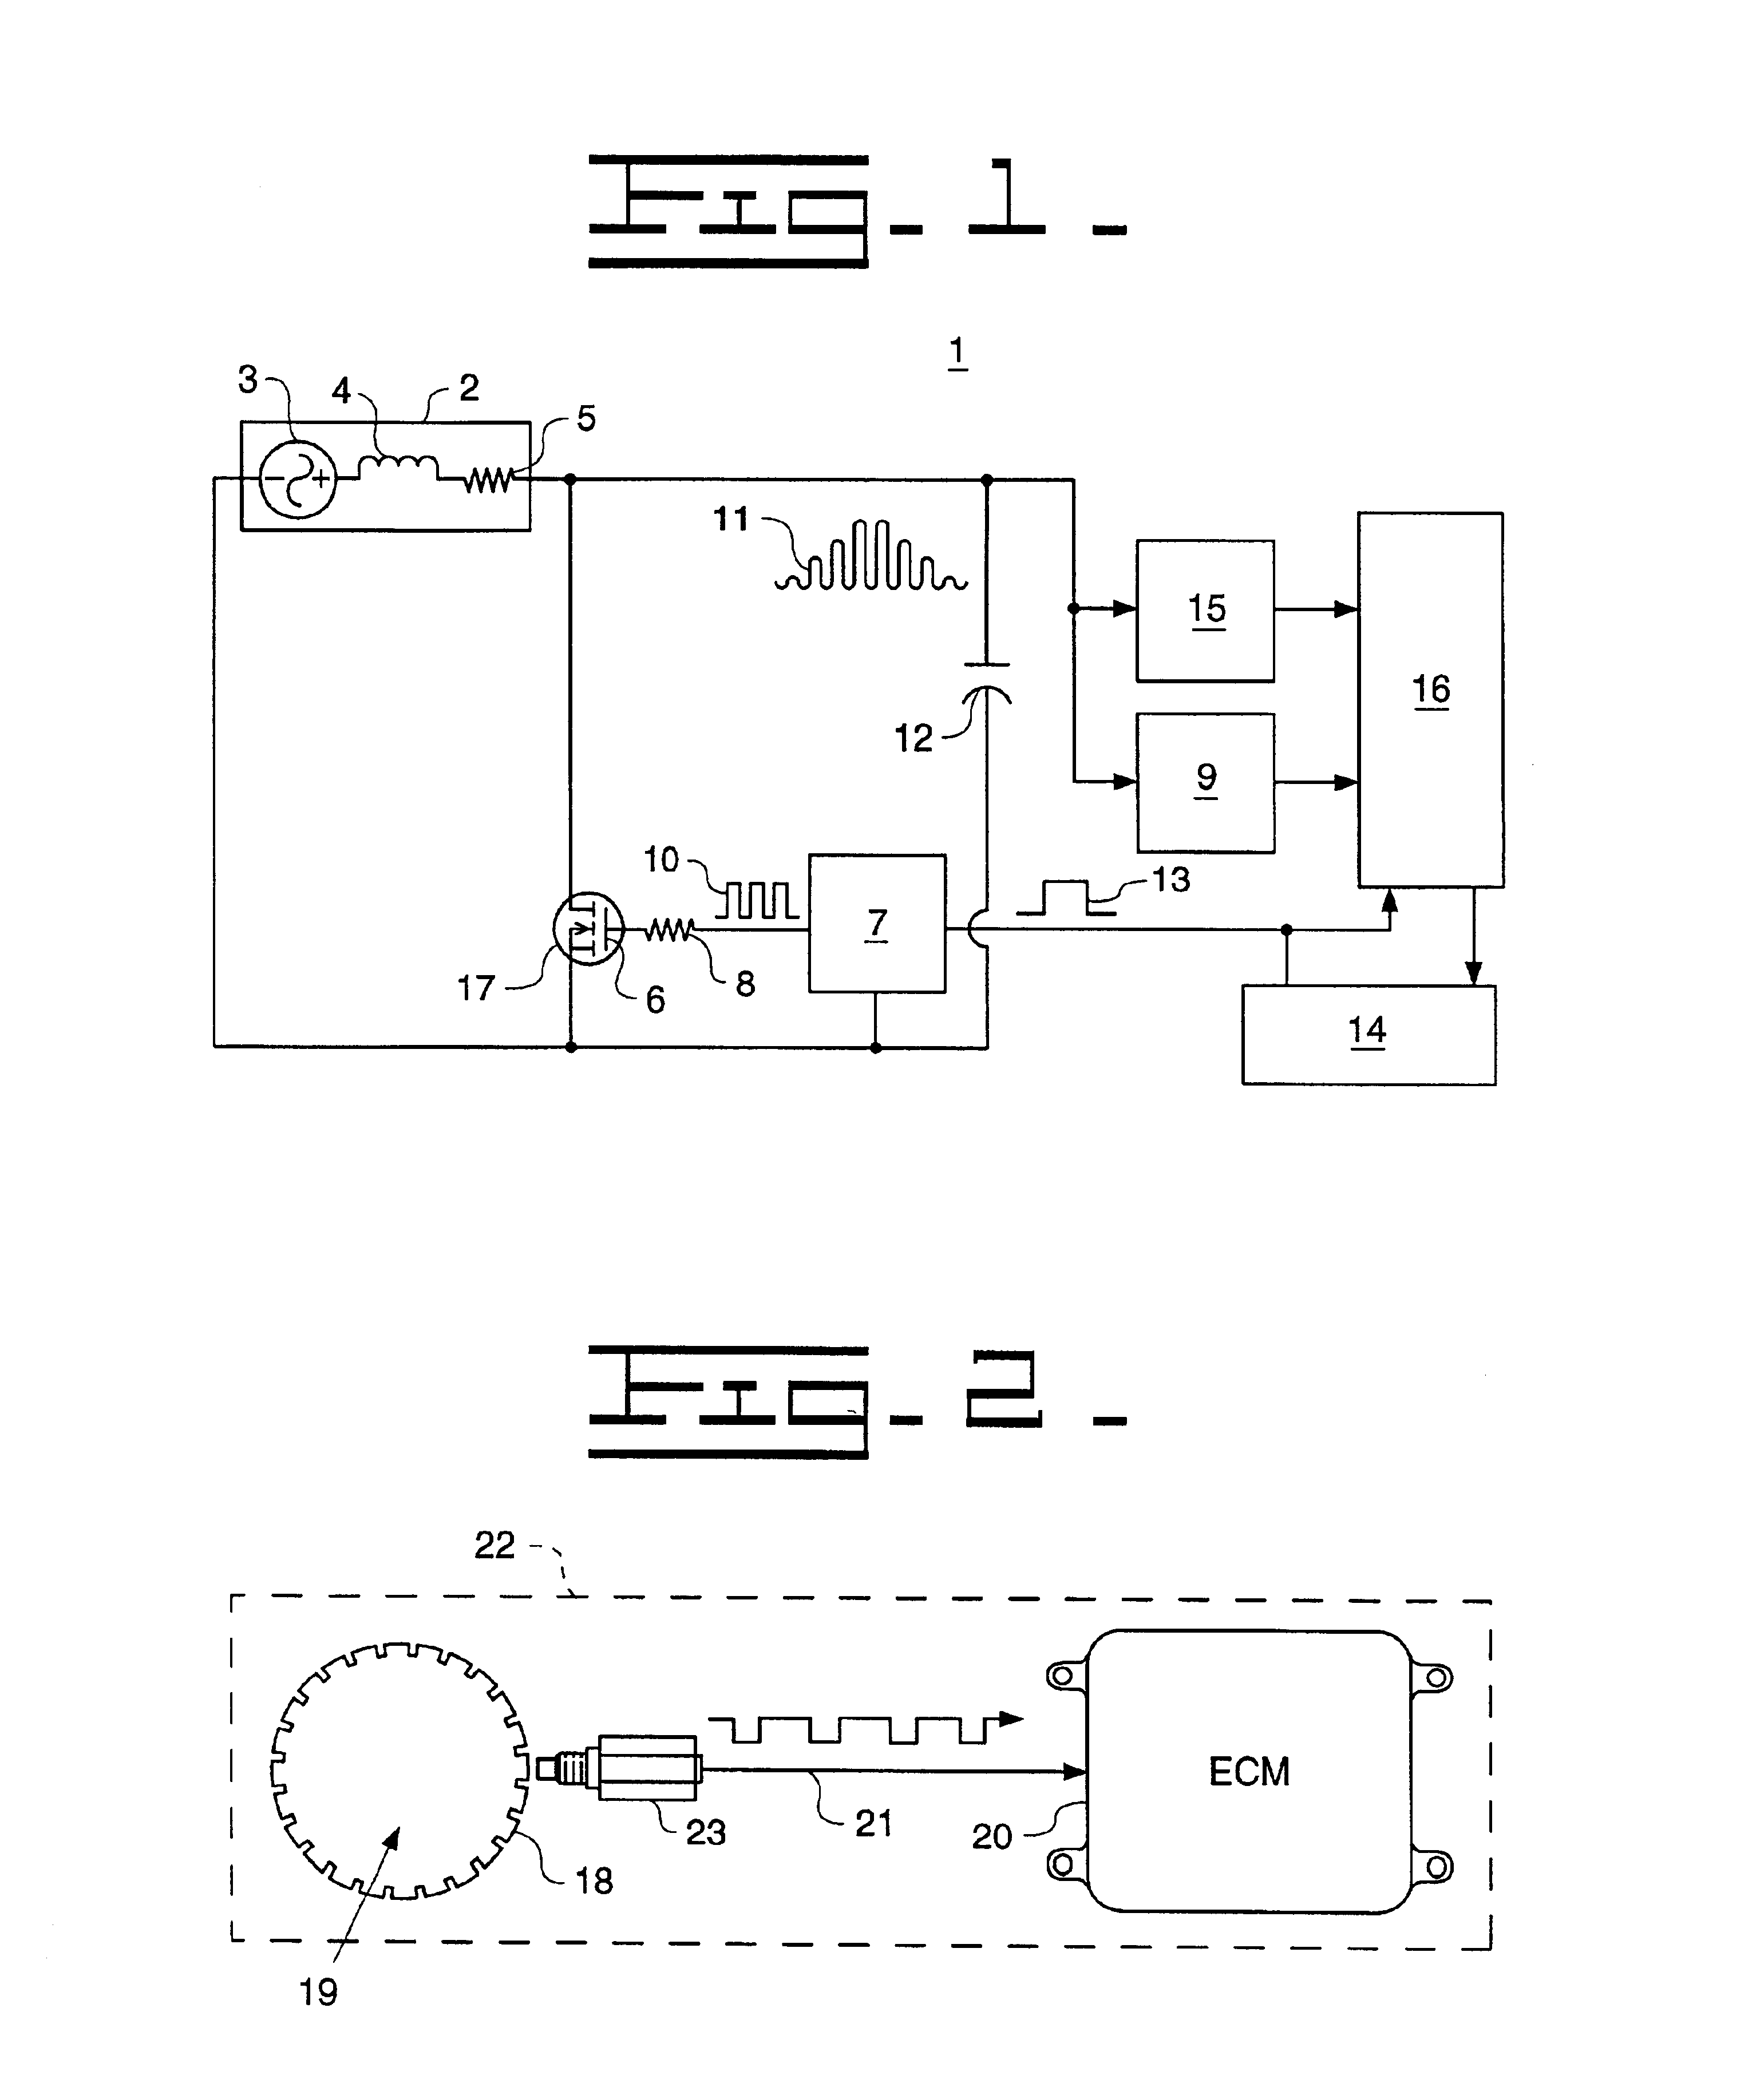 Resonant circuit for increasing variable reluctance sensor output